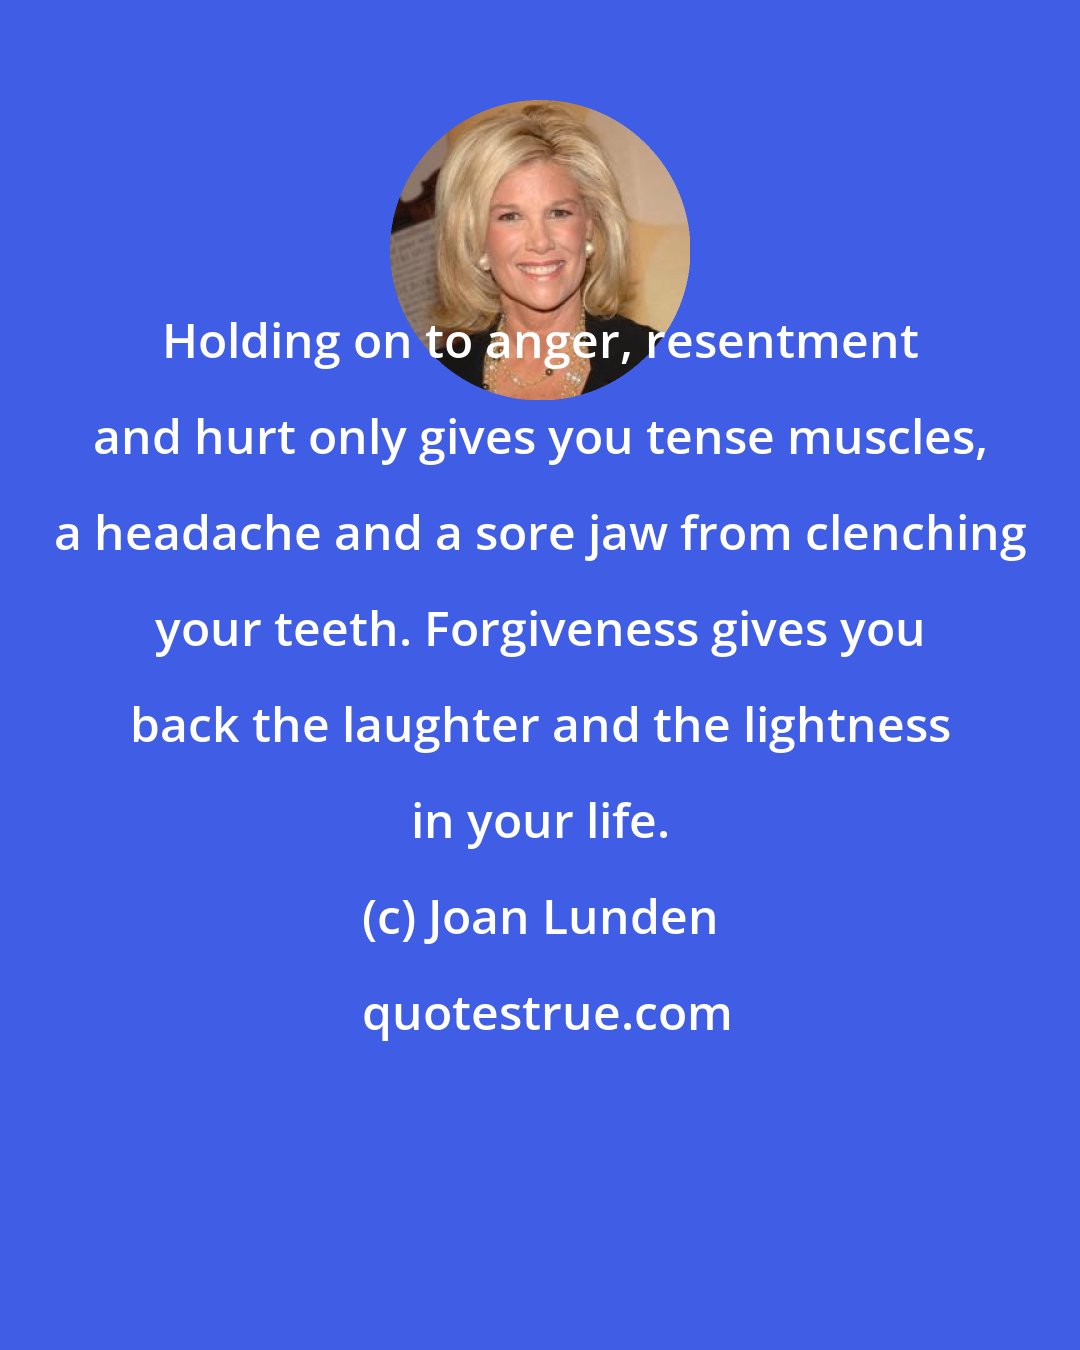 Joan Lunden: Holding on to anger, resentment and hurt only gives you tense muscles, a headache and a sore jaw from clenching your teeth. Forgiveness gives you back the laughter and the lightness in your life.